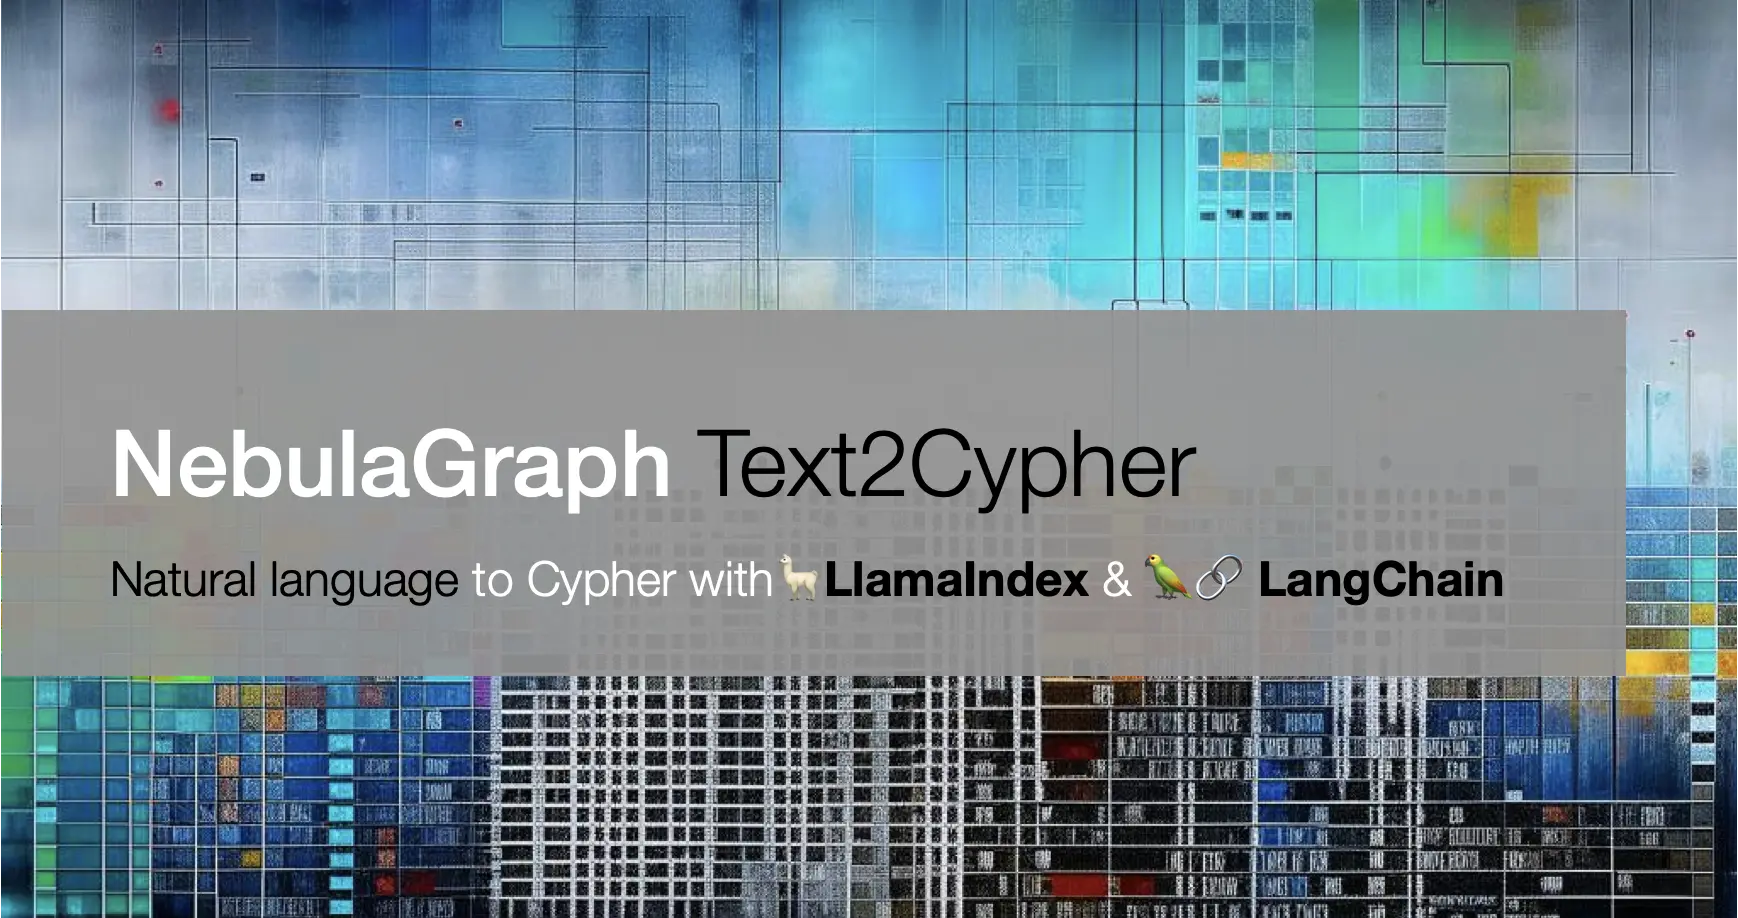 How to easily do text2cypher with NebulaGraph